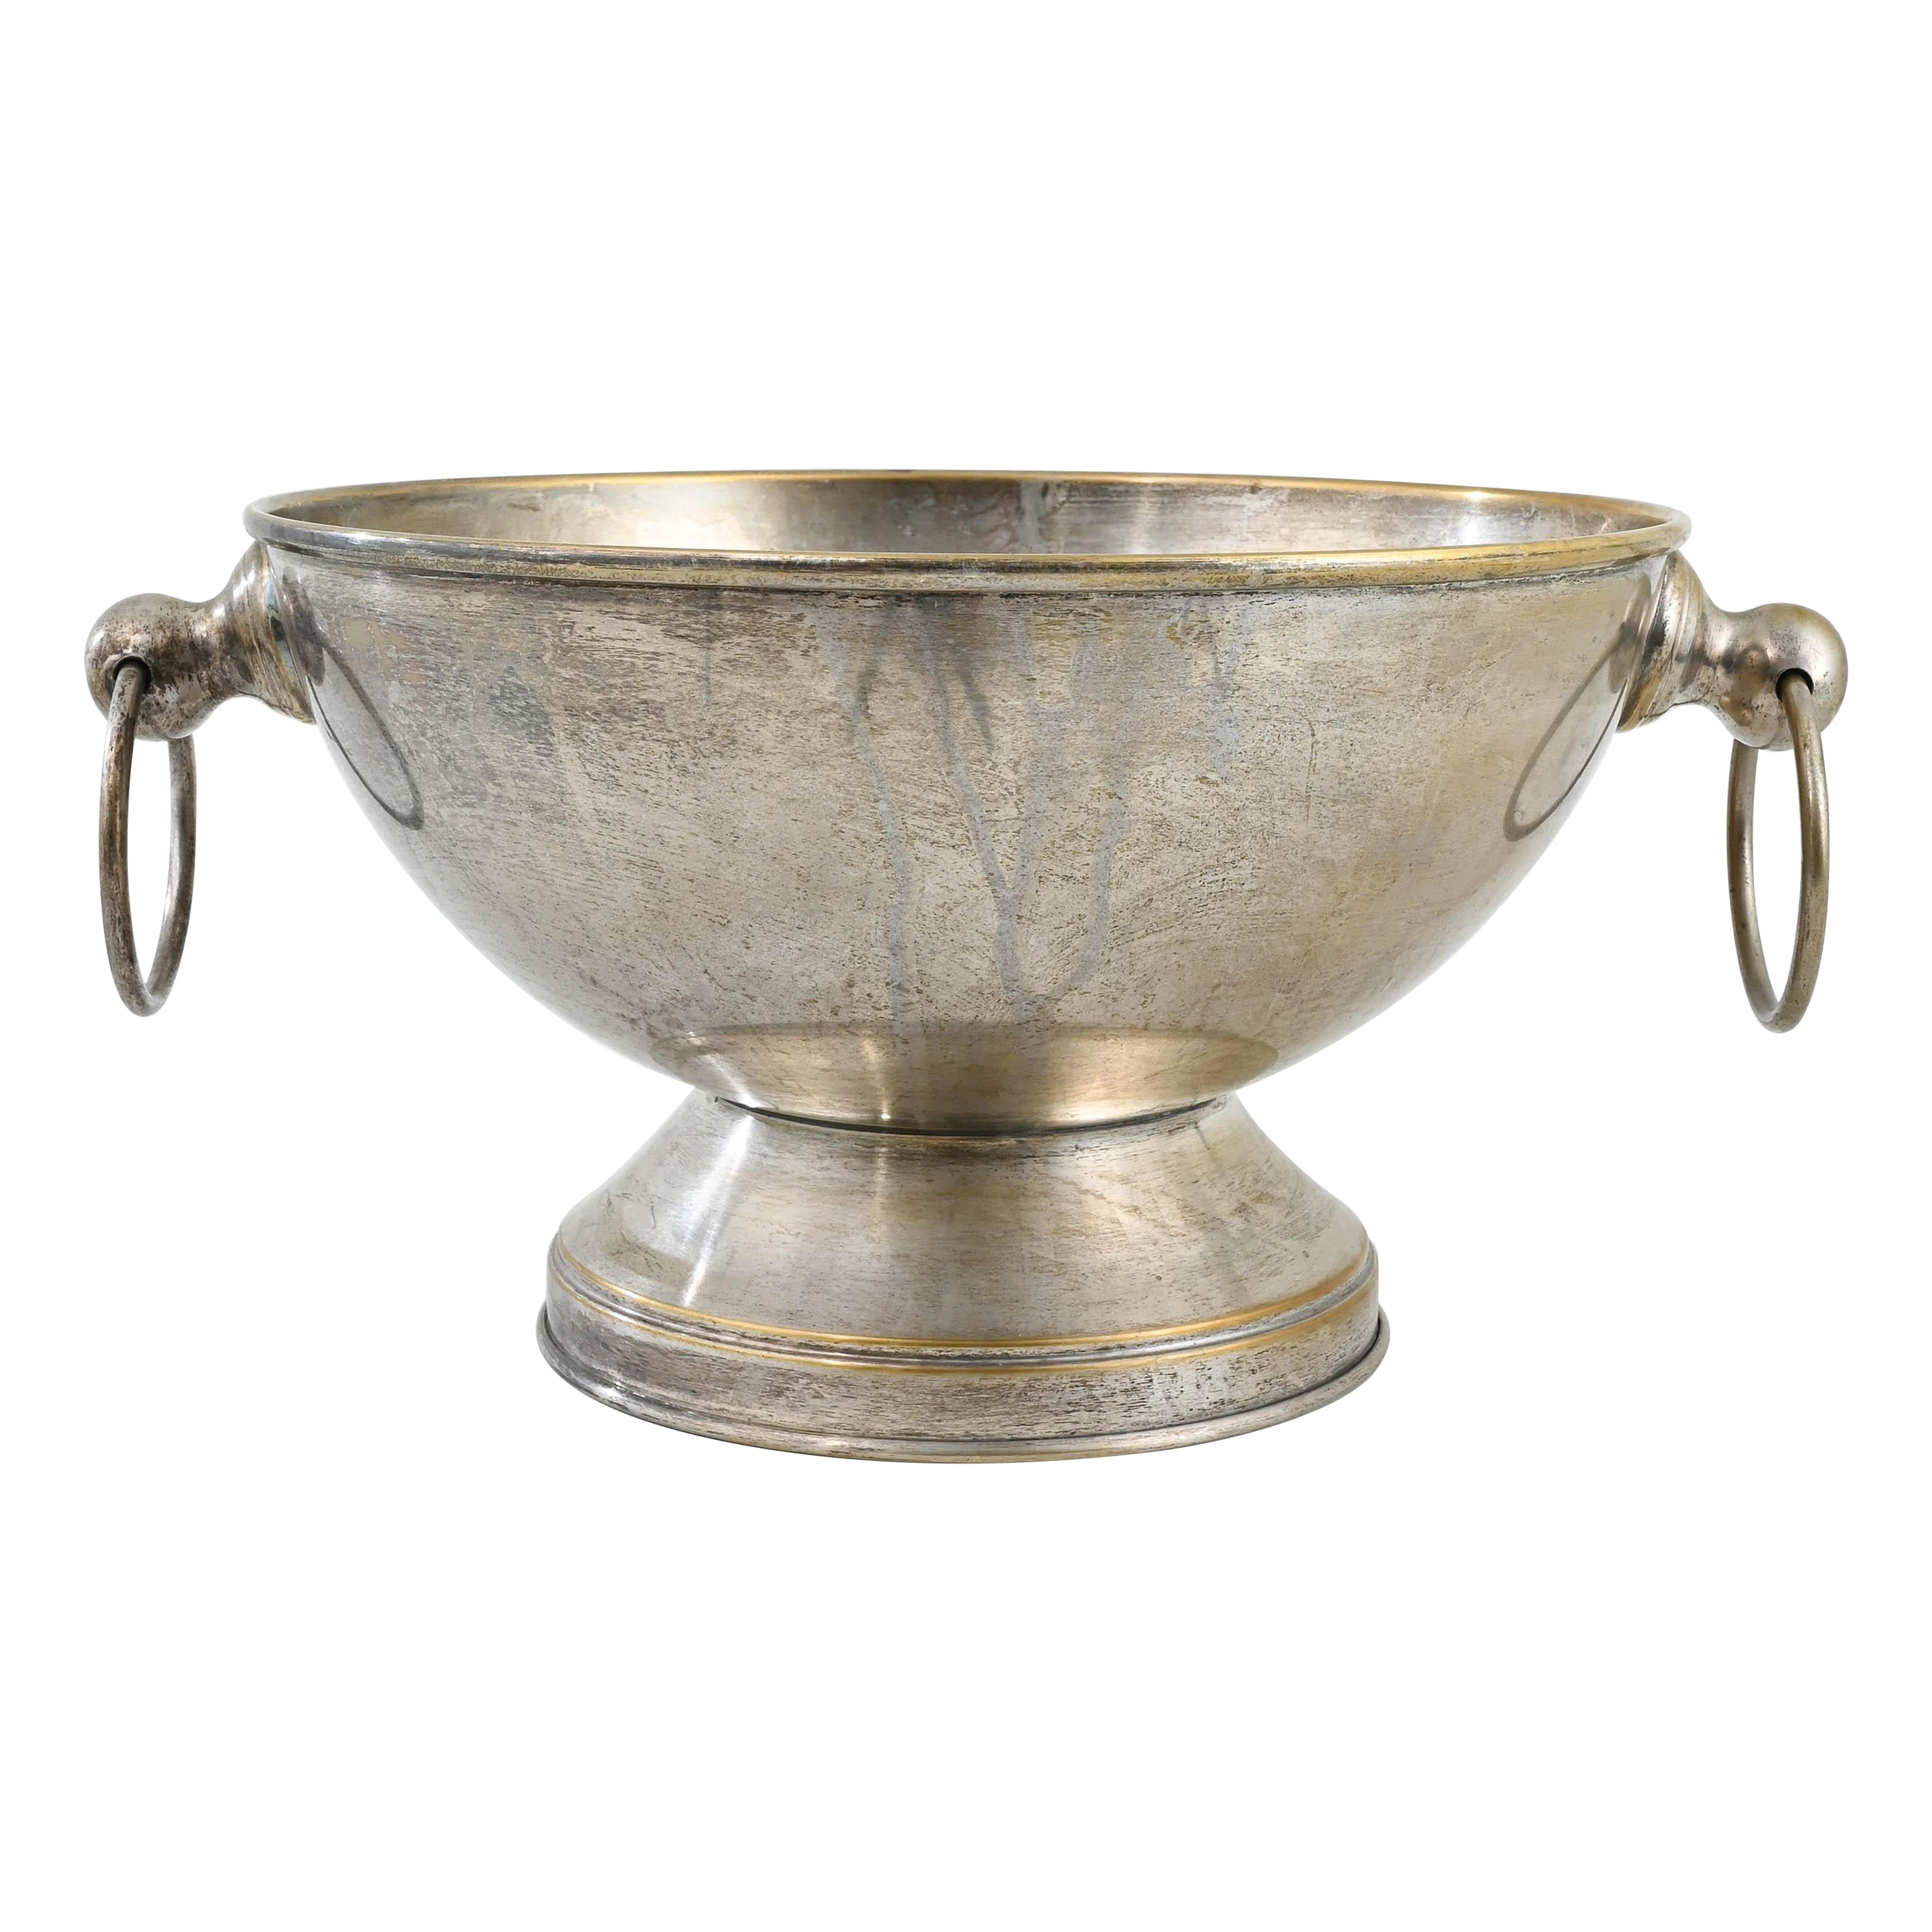 Vintage French Silver Plated Brass Bowl